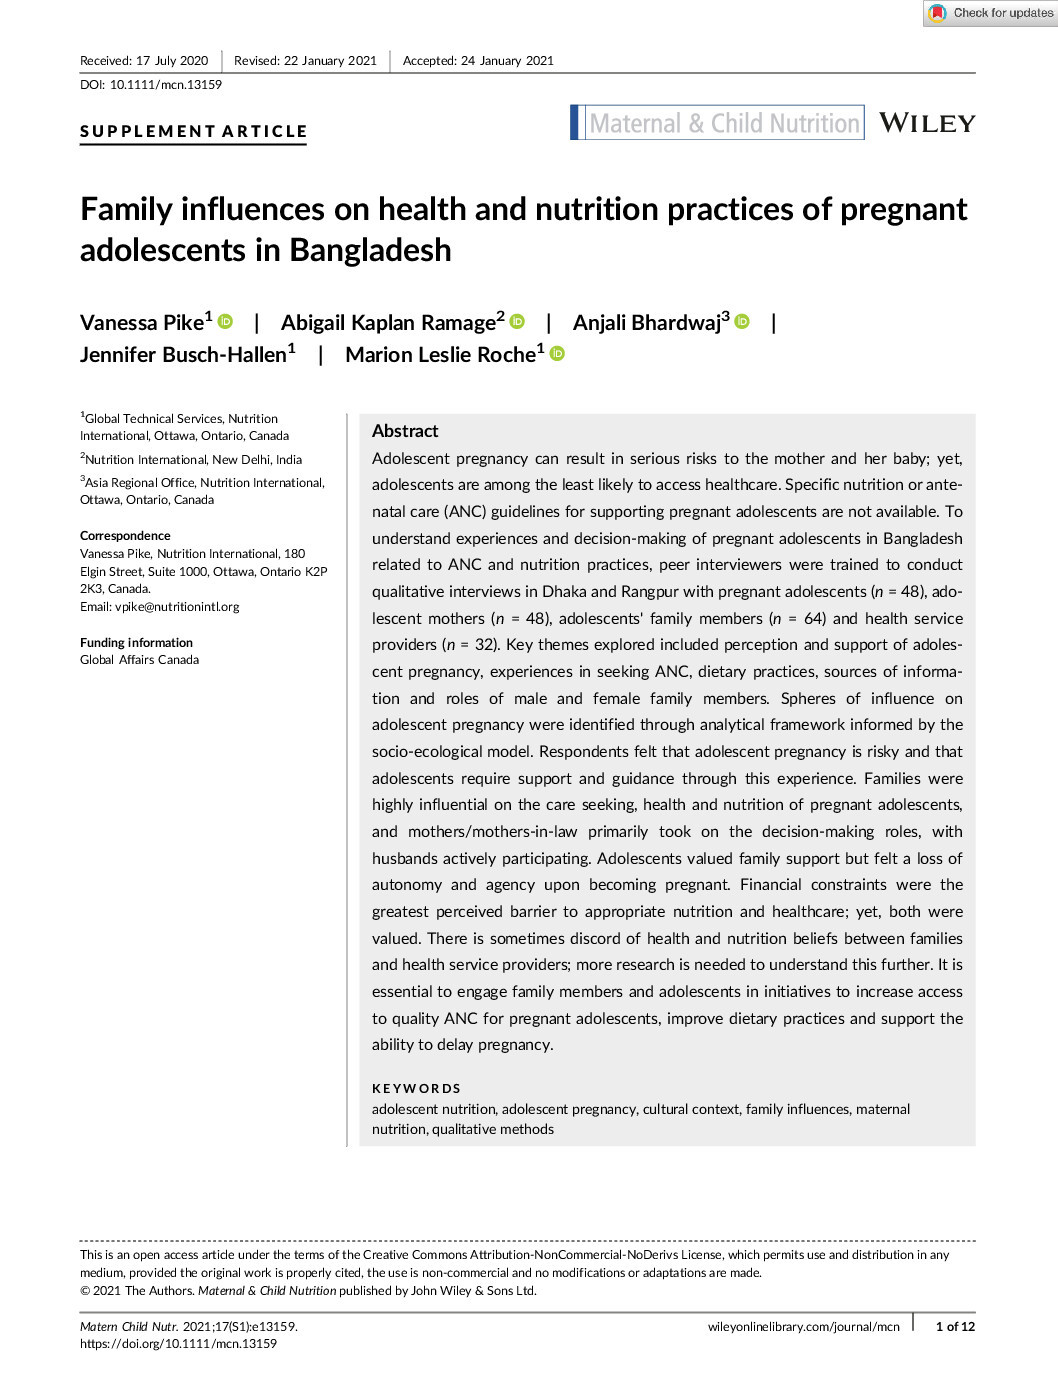 Family influences on health and nutrition practices of pregnant adolescents in Bangladesh thumbnail